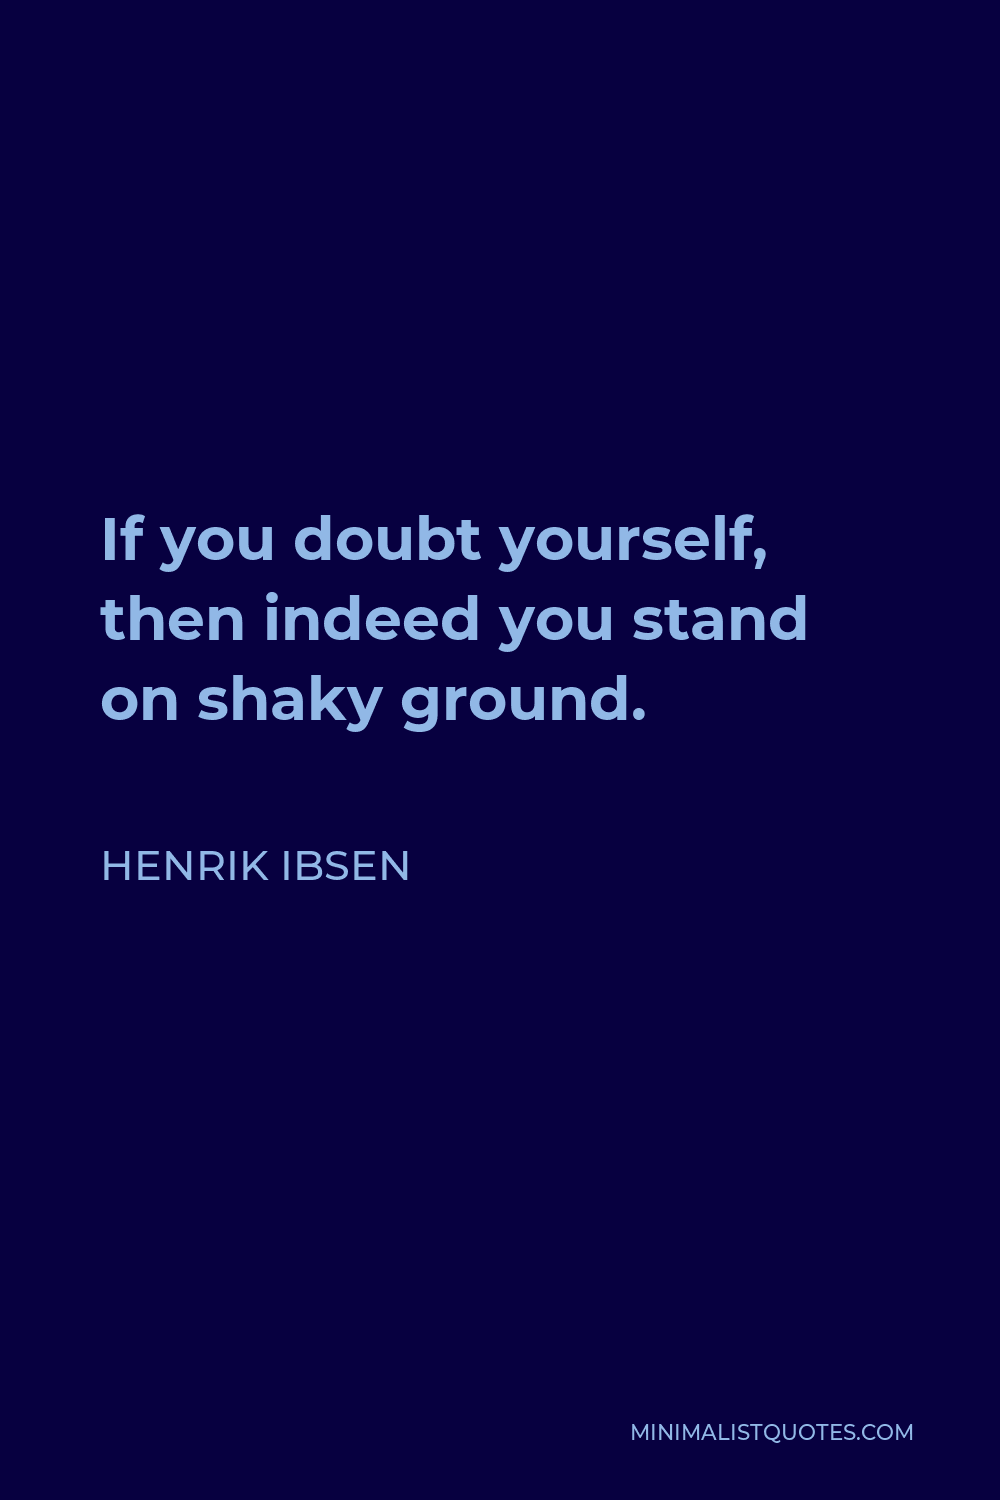 Henrik Ibsen Quote - If you doubt yourself, then indeed you stand on shaky ground.